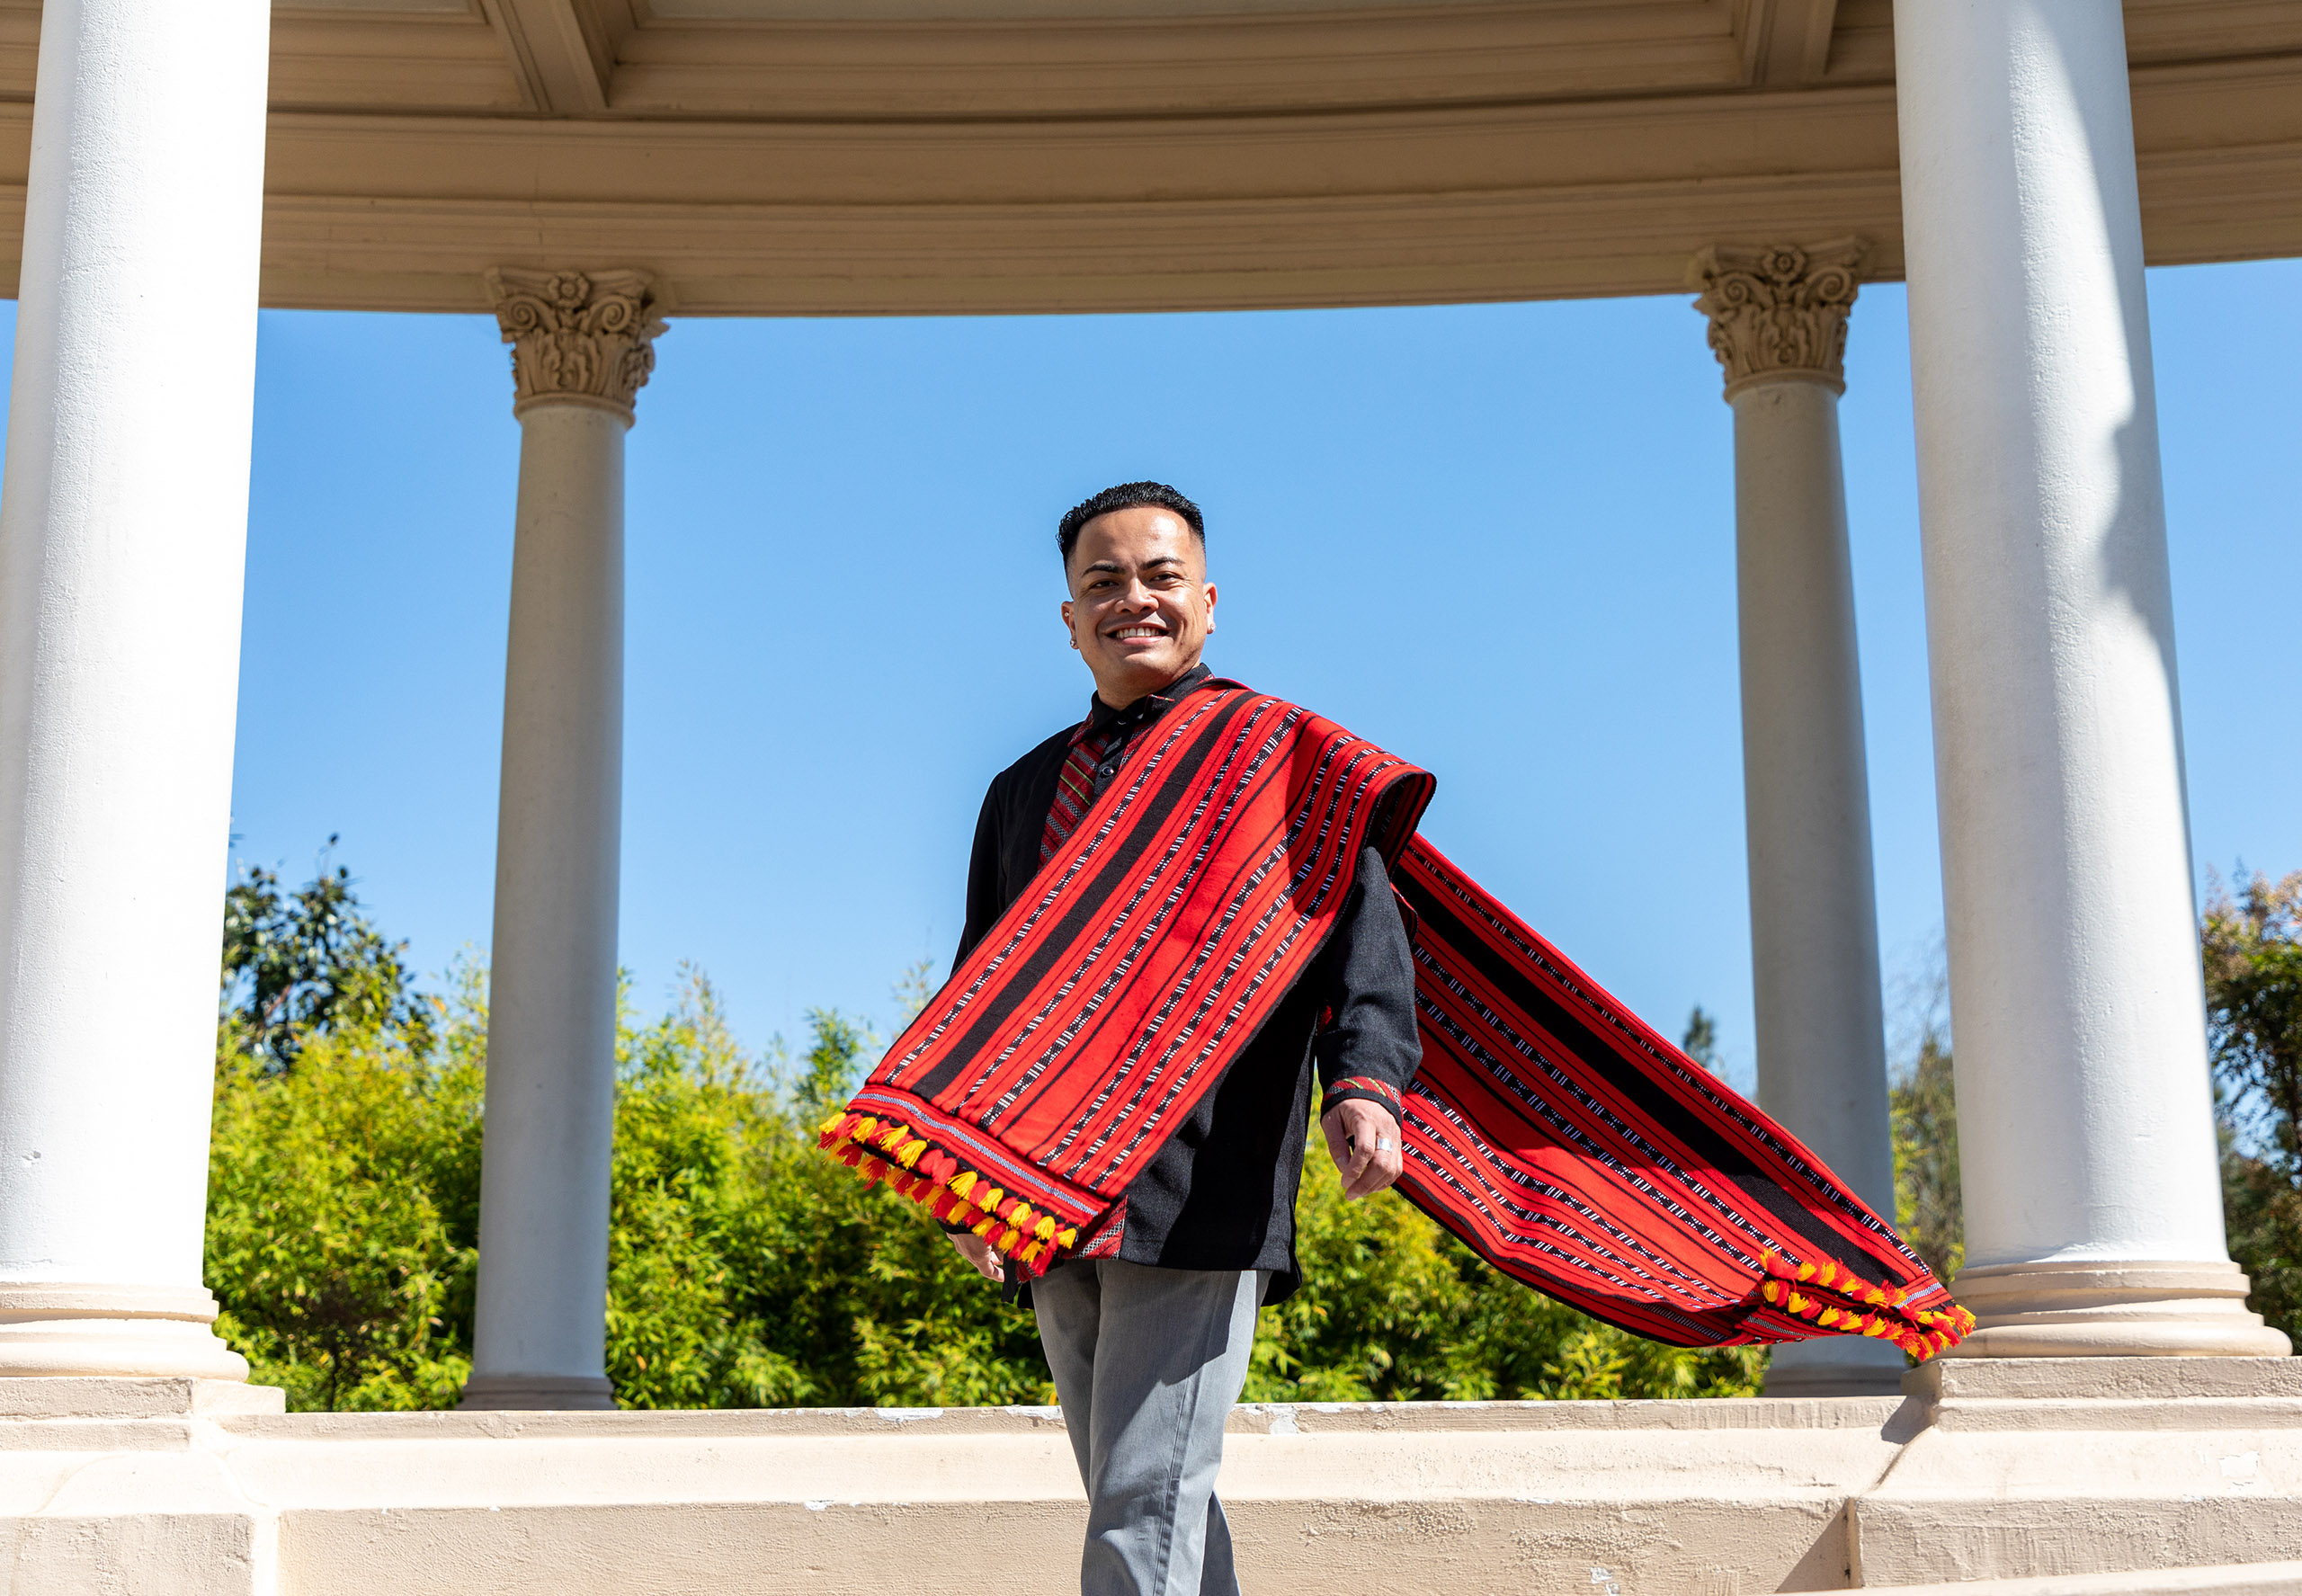 A Philippino-American man with a long, red woven scarf stands among several stone columns under a blue sky.  